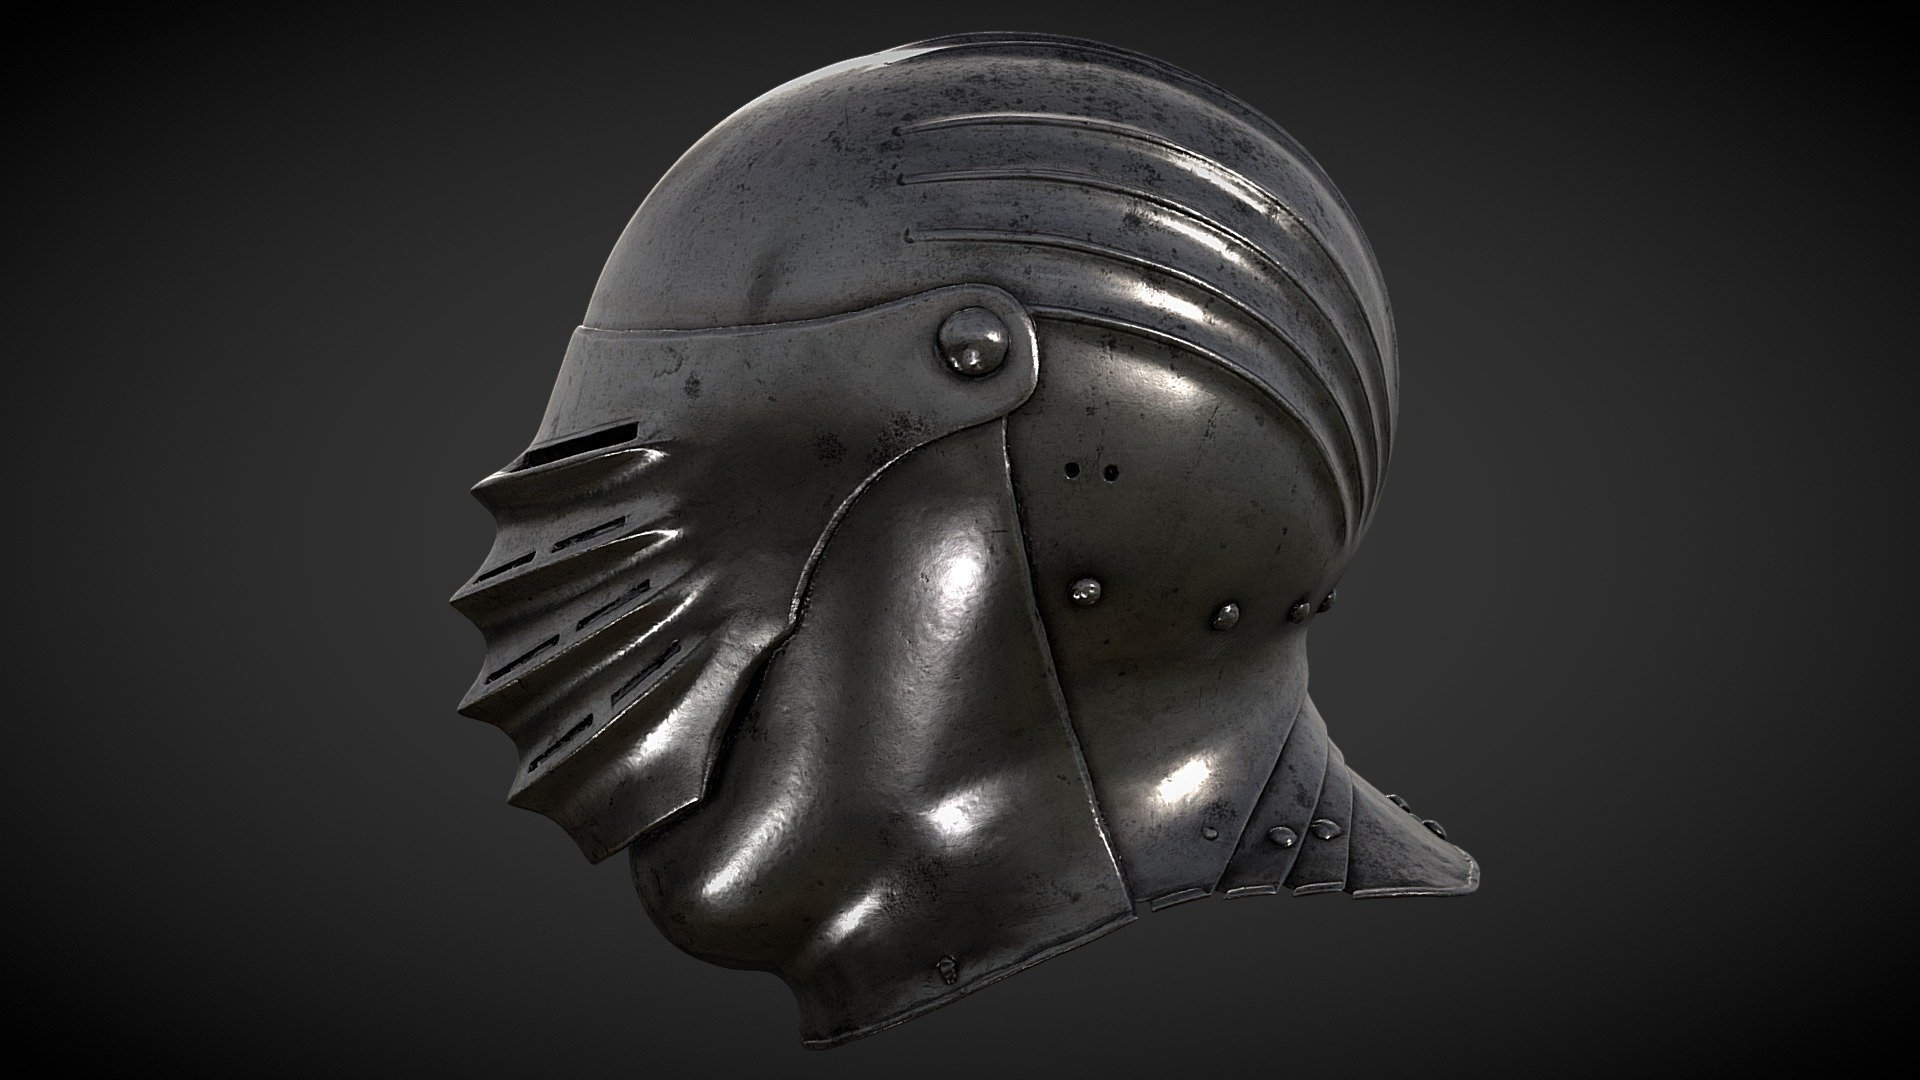 This helmet is part of a suit armour with similar decorative grooves as on the helmet’s skull.

This type of armour is often referred to as Maximilian armour (after the Holy Roman Emperor Maximilian I). The bellows visor on the helmet is also characteristic of this type of armour.

It was thought, during the 19th century, that the helmet had belonged to King Johan I of Sweden (who died in 1222) but it was later revealed that the helmet had in fact been made in Germany around 1510 3d model